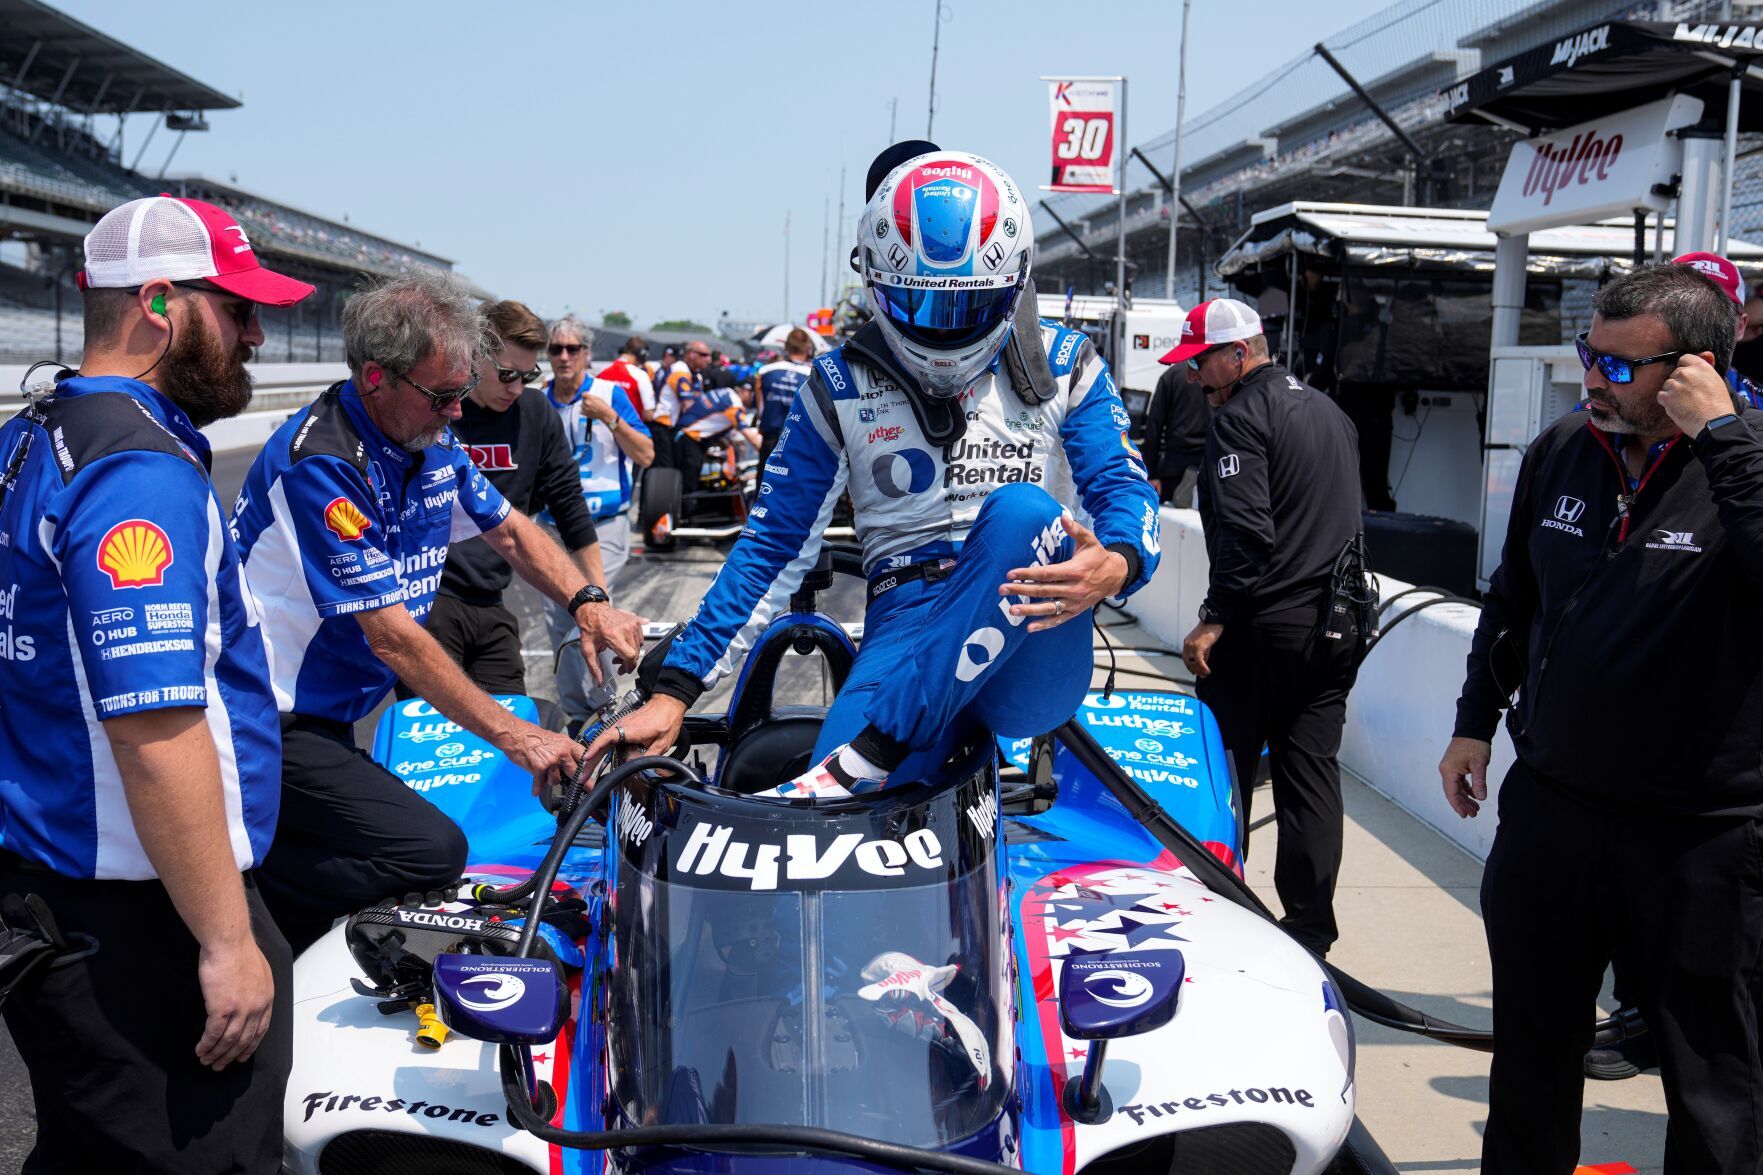 Bobby Rahal wants son Graham with IndyCar team next year and beyond